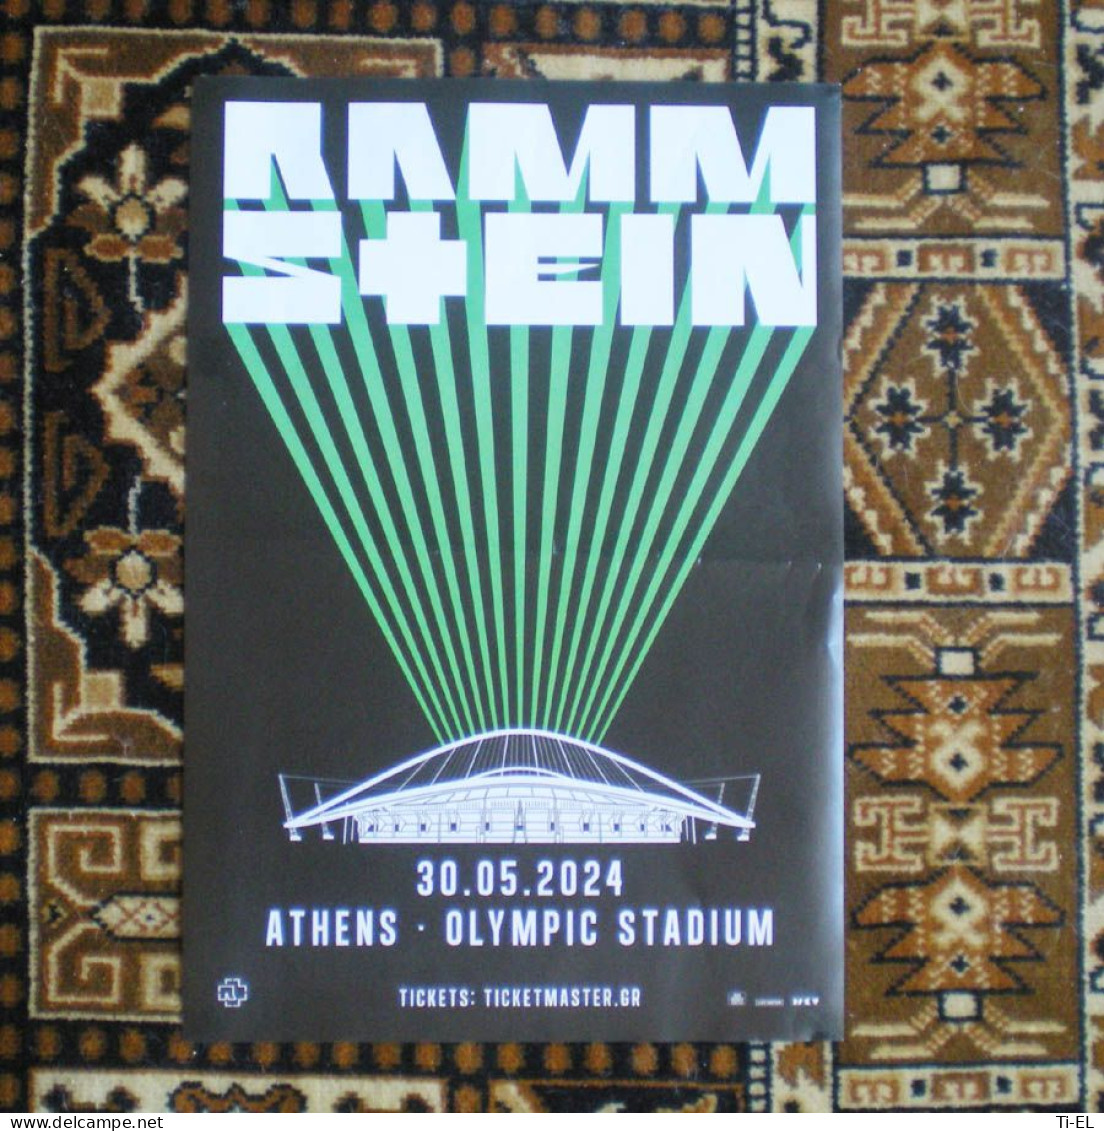 RAMMSTEIN: Original Poster (NEW EDITION) For Their Forthcoming Concert In Athens, Greece On 30.May.2024 - Plakate & Poster